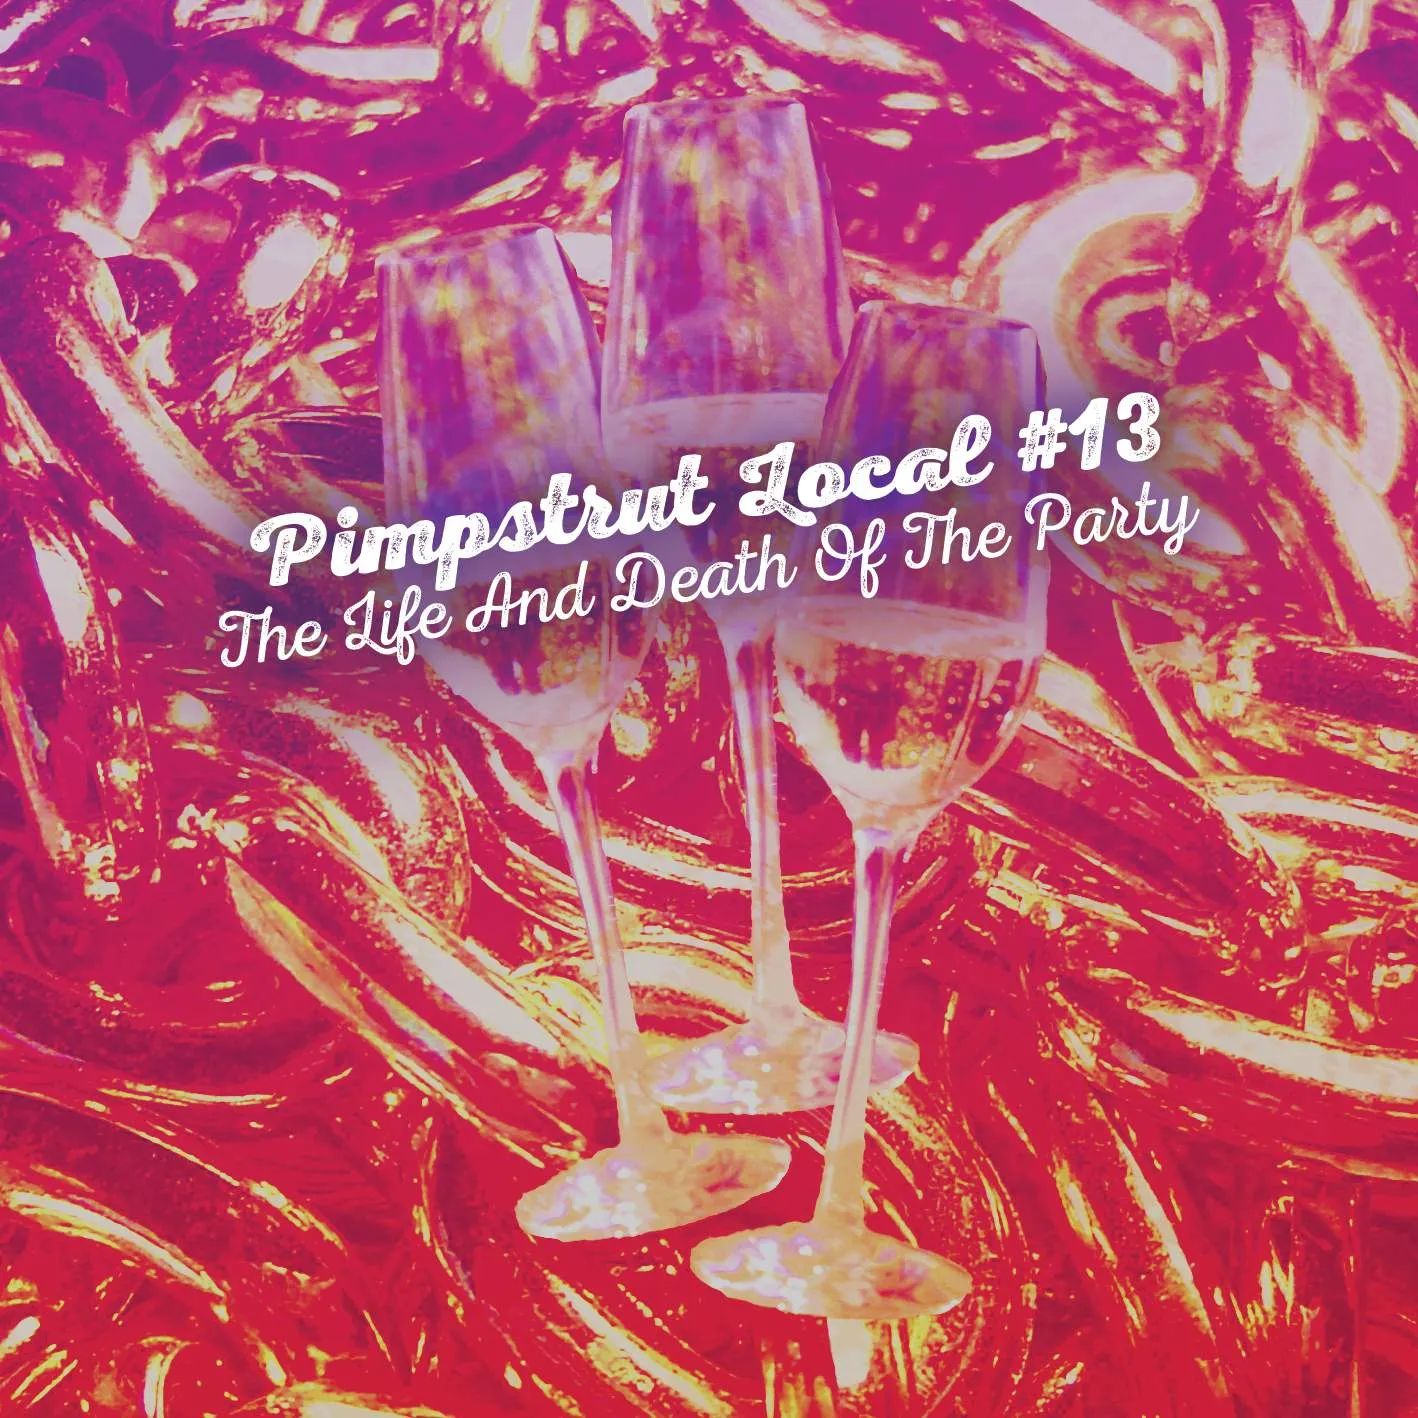 Album cover for “The Life And Death Of The Party” by Pimpstrut Local #13